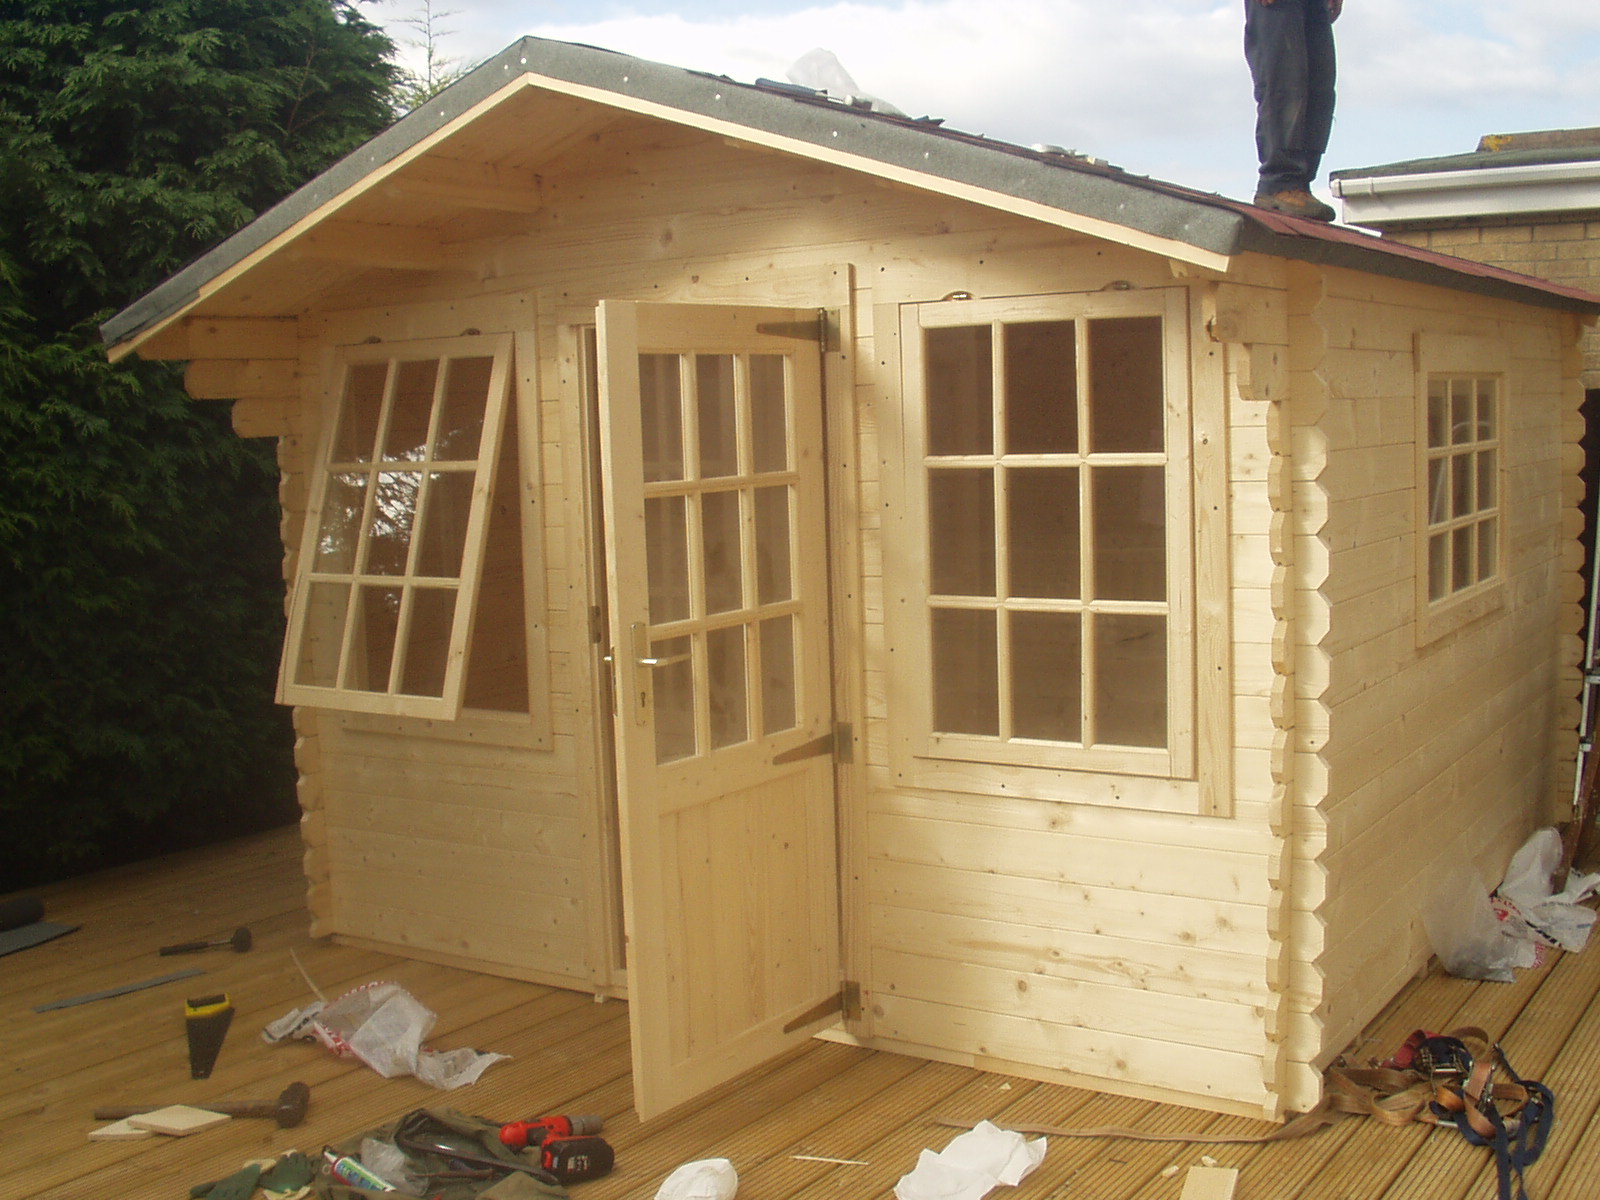  skipping any parts or trying to rush things in building DIY sheds